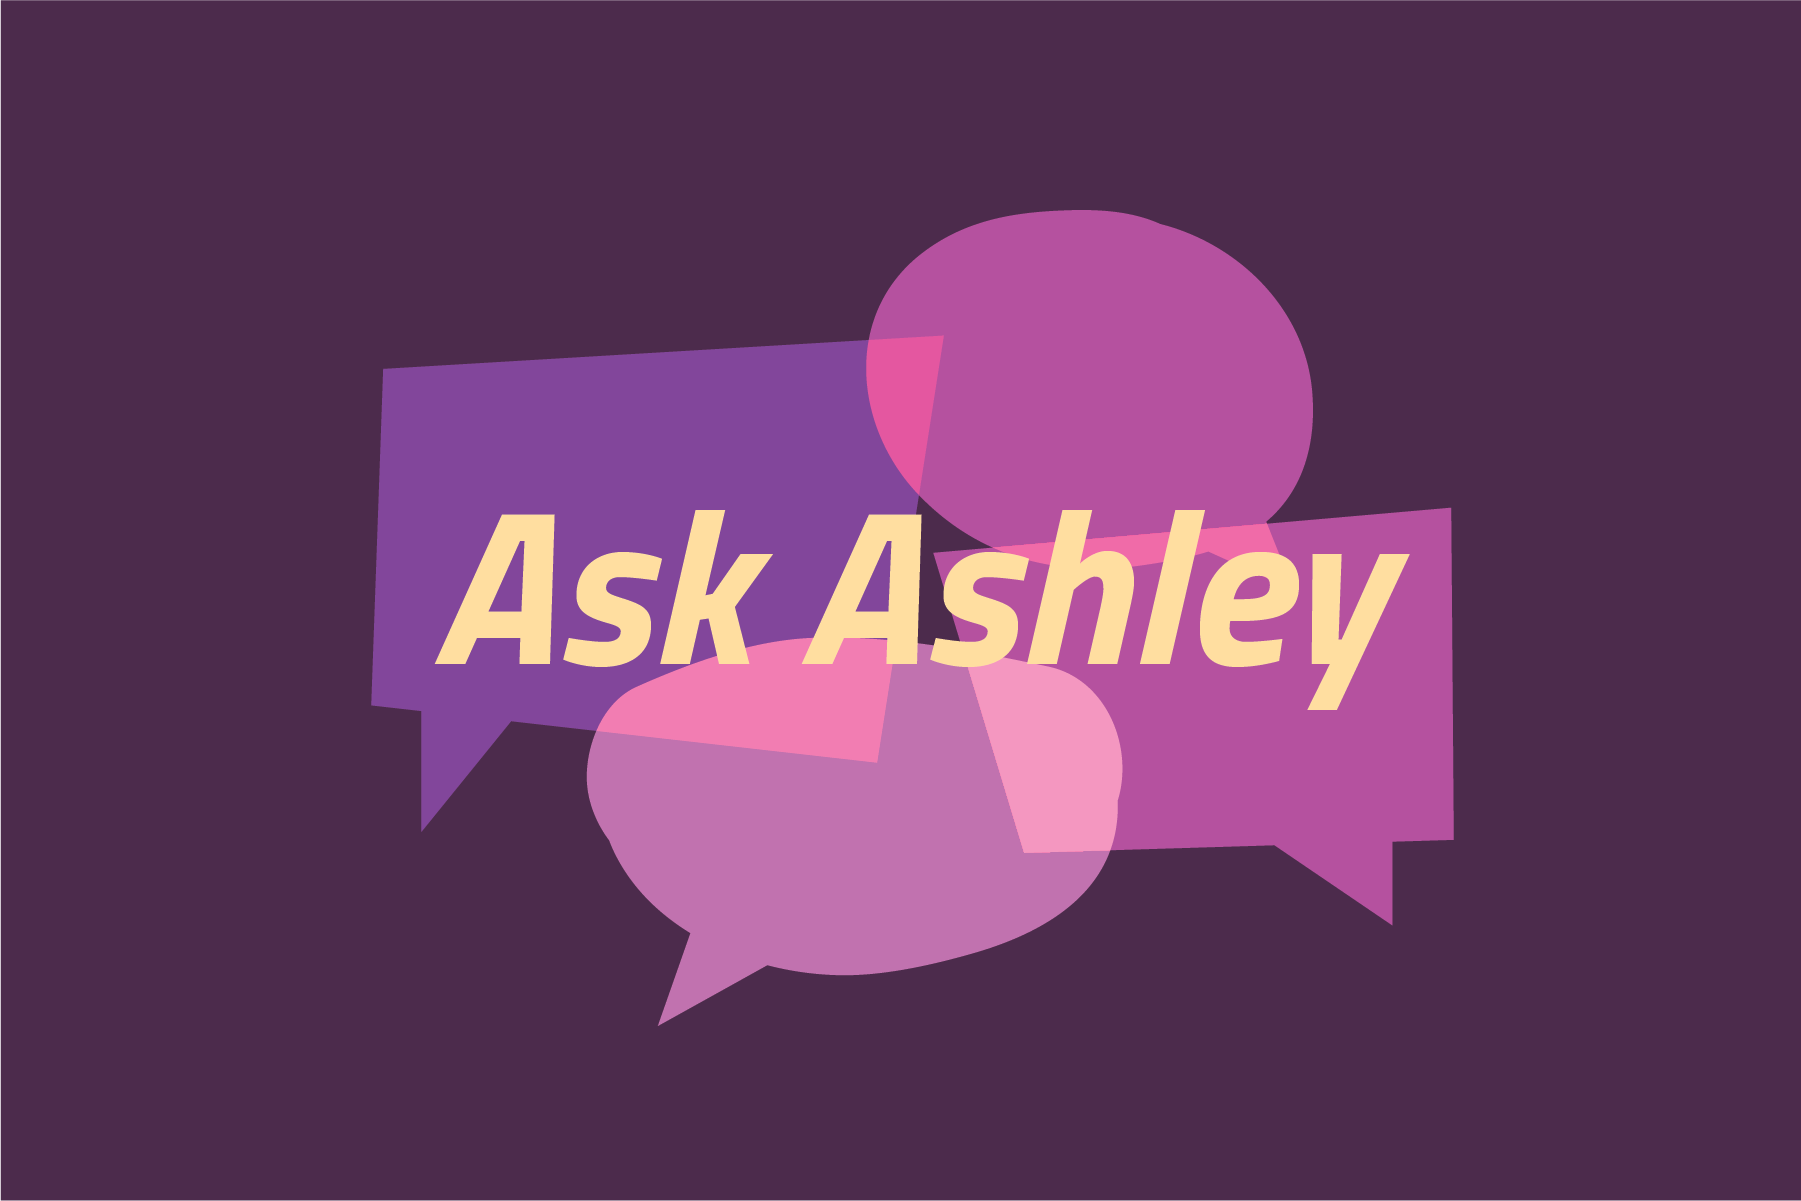 The logo for The Cougar's advice column, Ask Ashley